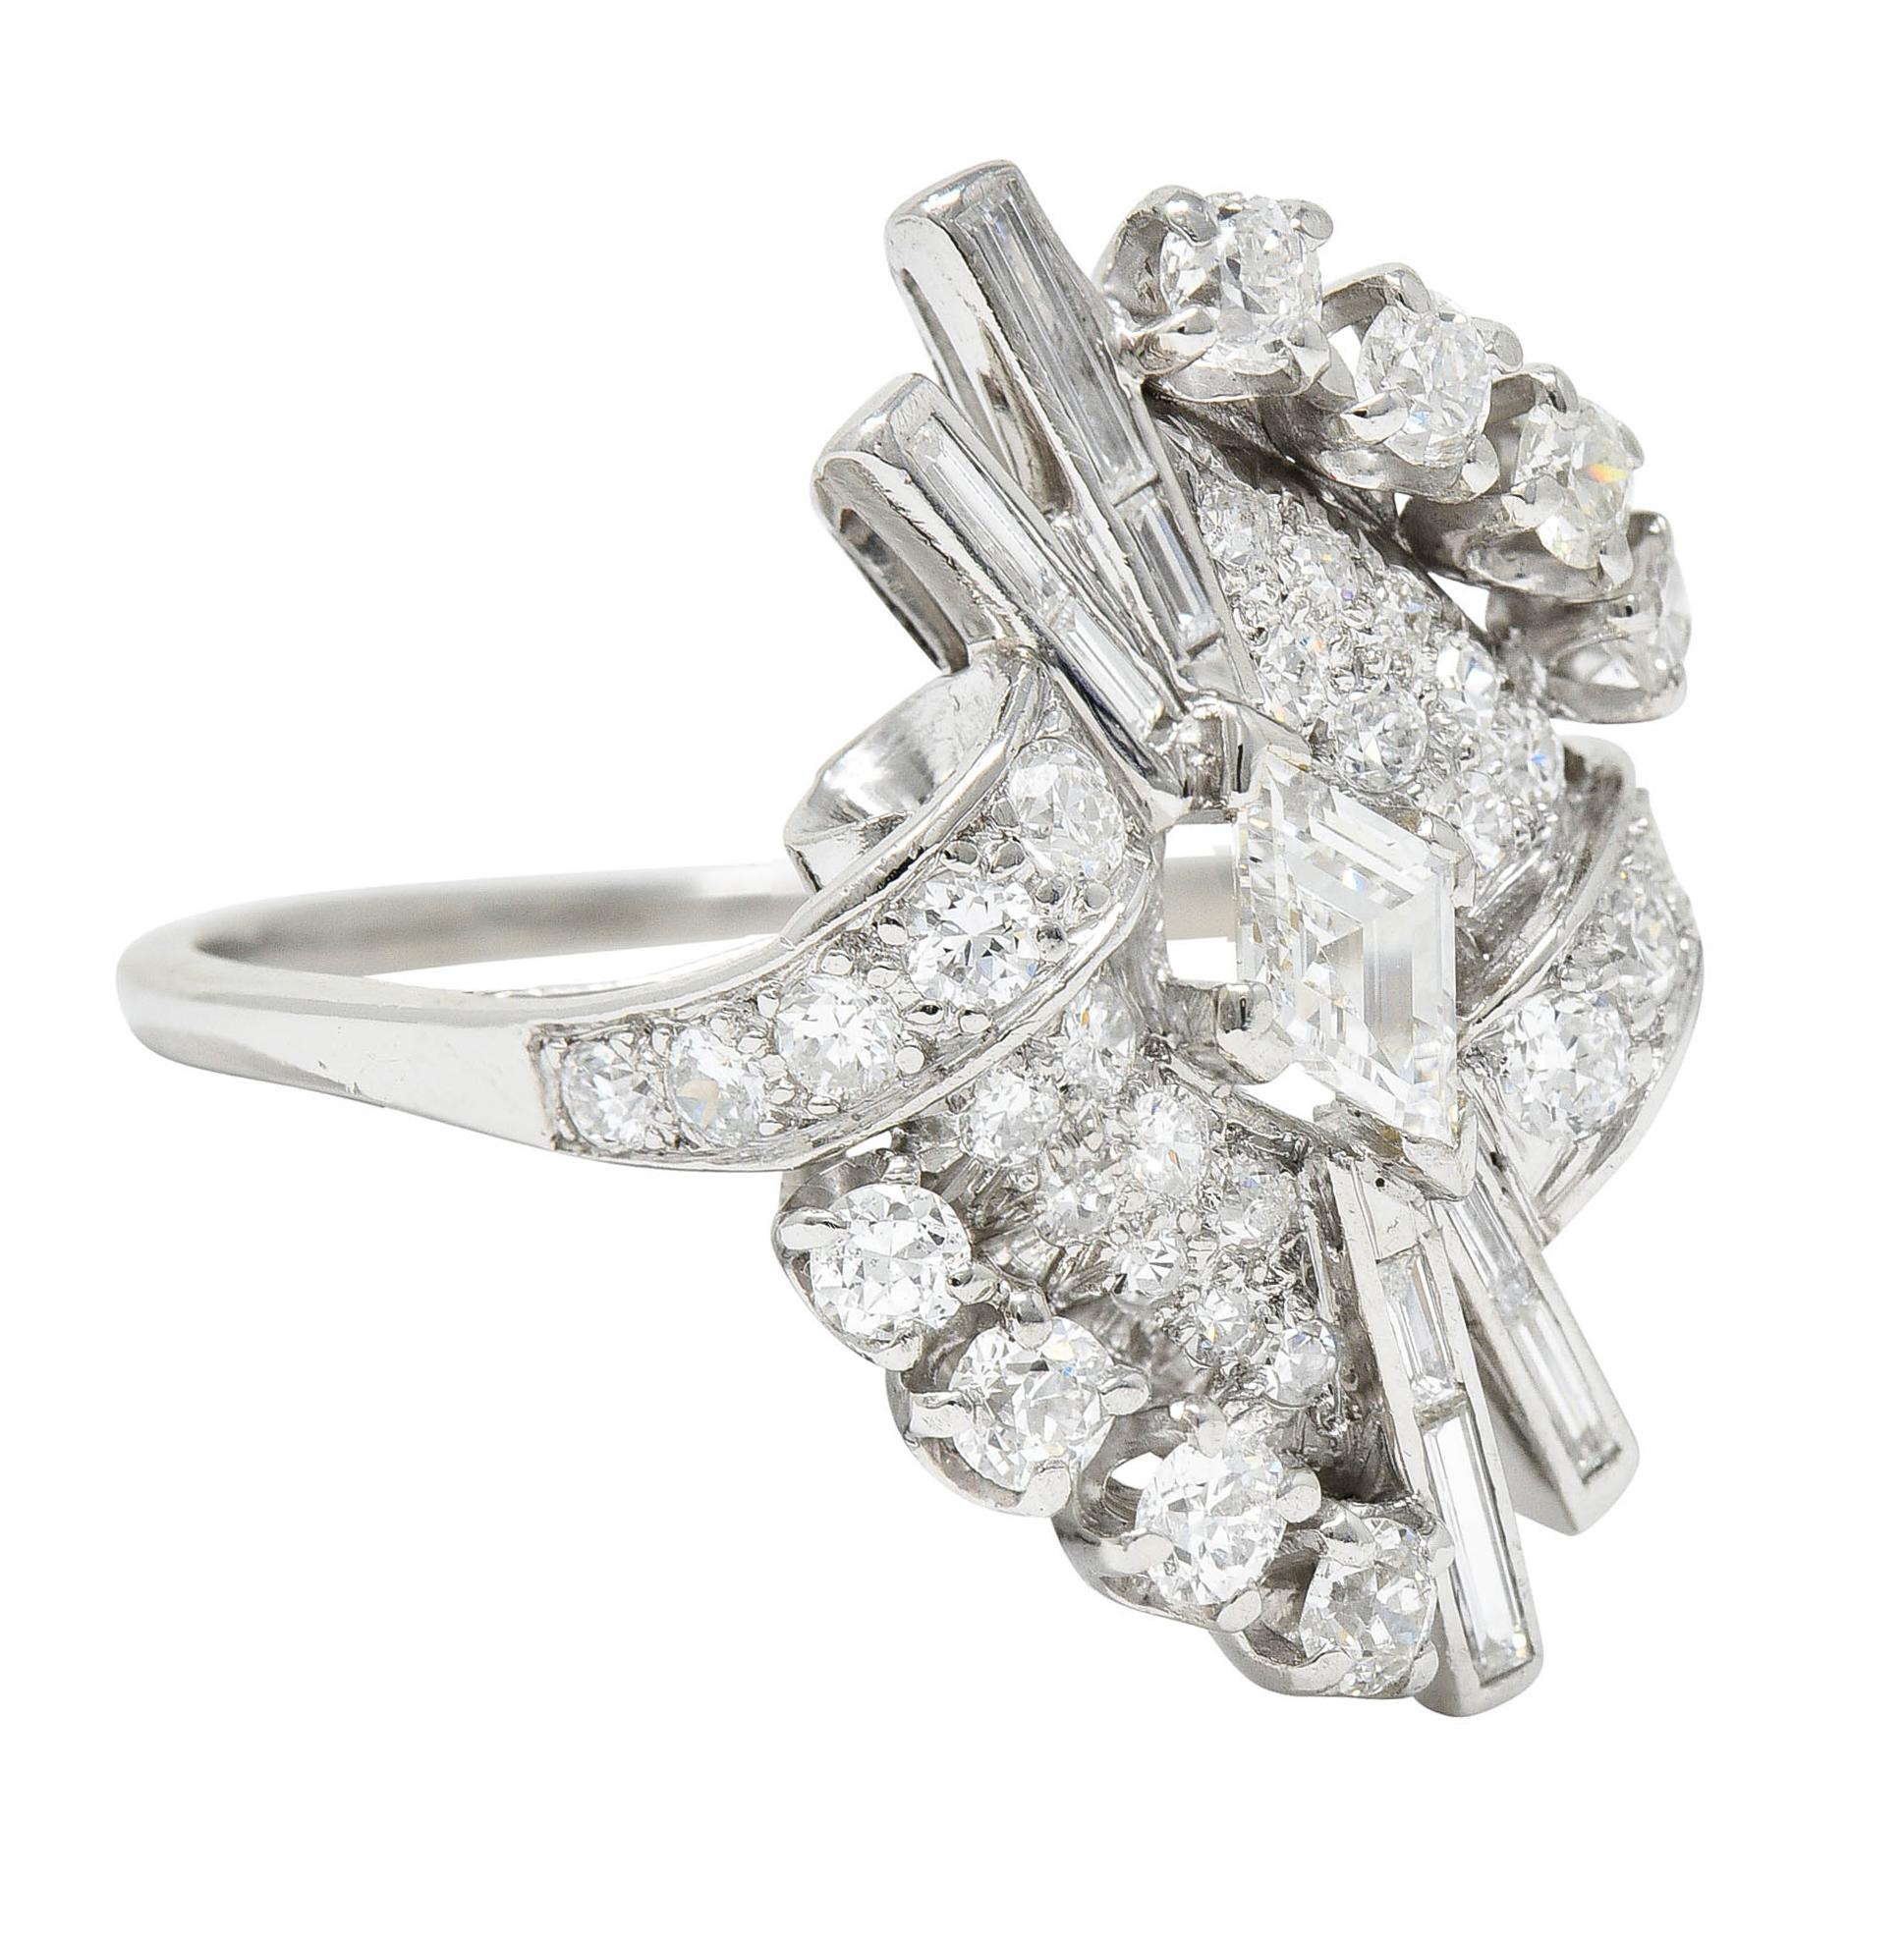 Stylized bypass ring features a starburst motif with ribboned scrolled shoulders

Centering a navette stepped cut diamond weighing approximately 0.35 carat - G/H color with VS clarity

Linear extensions are channel set with baguette cut diamonds